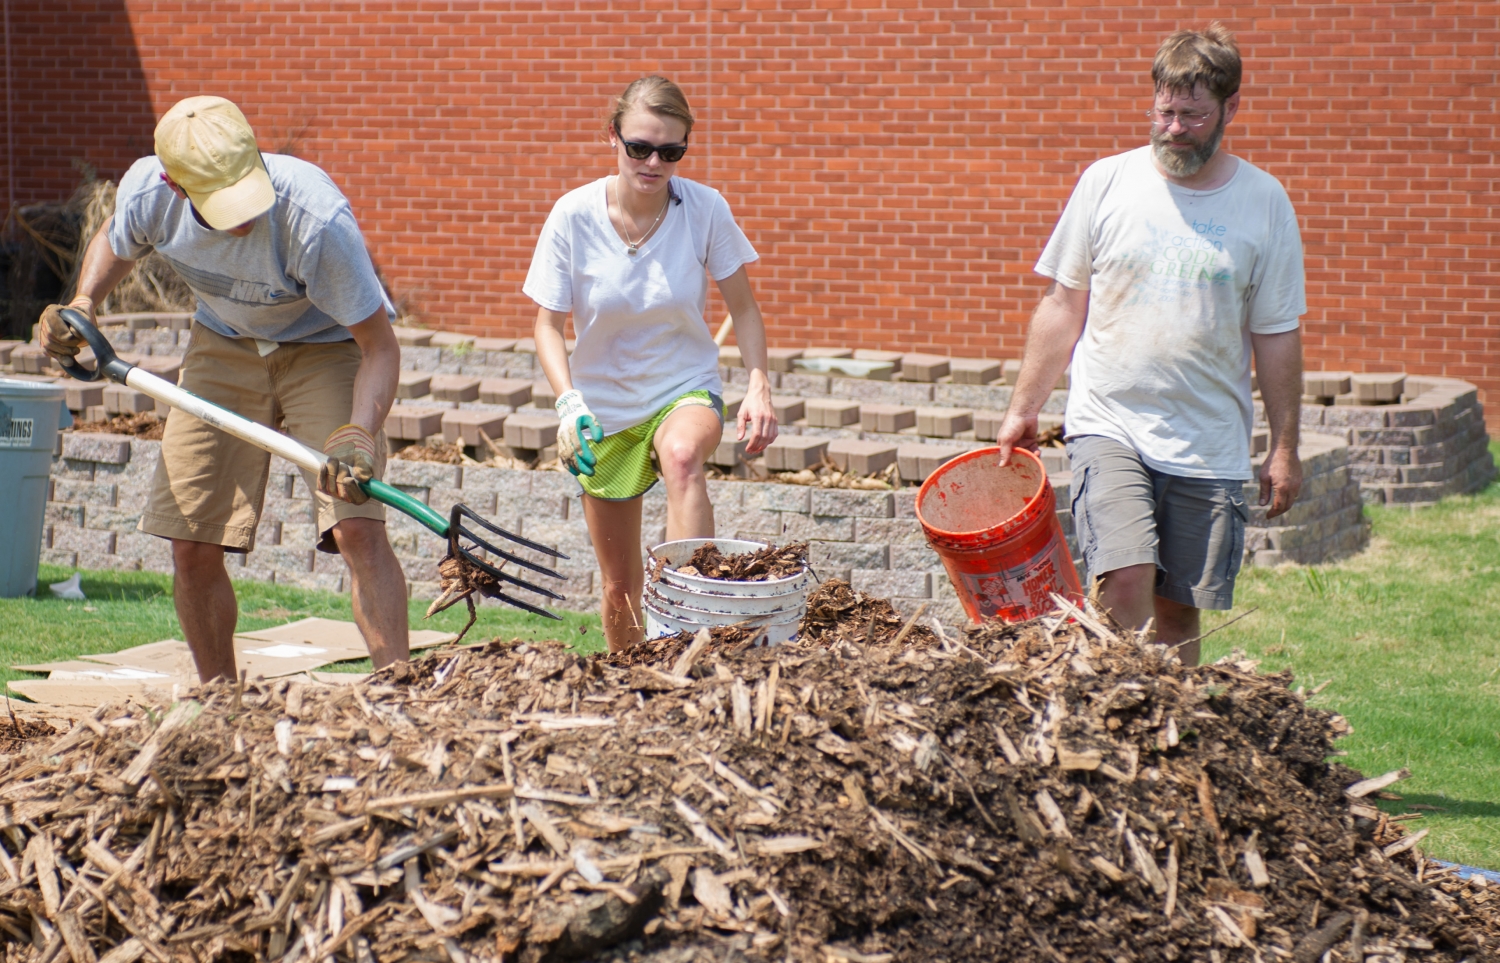 Students and faculty working on the campus garden